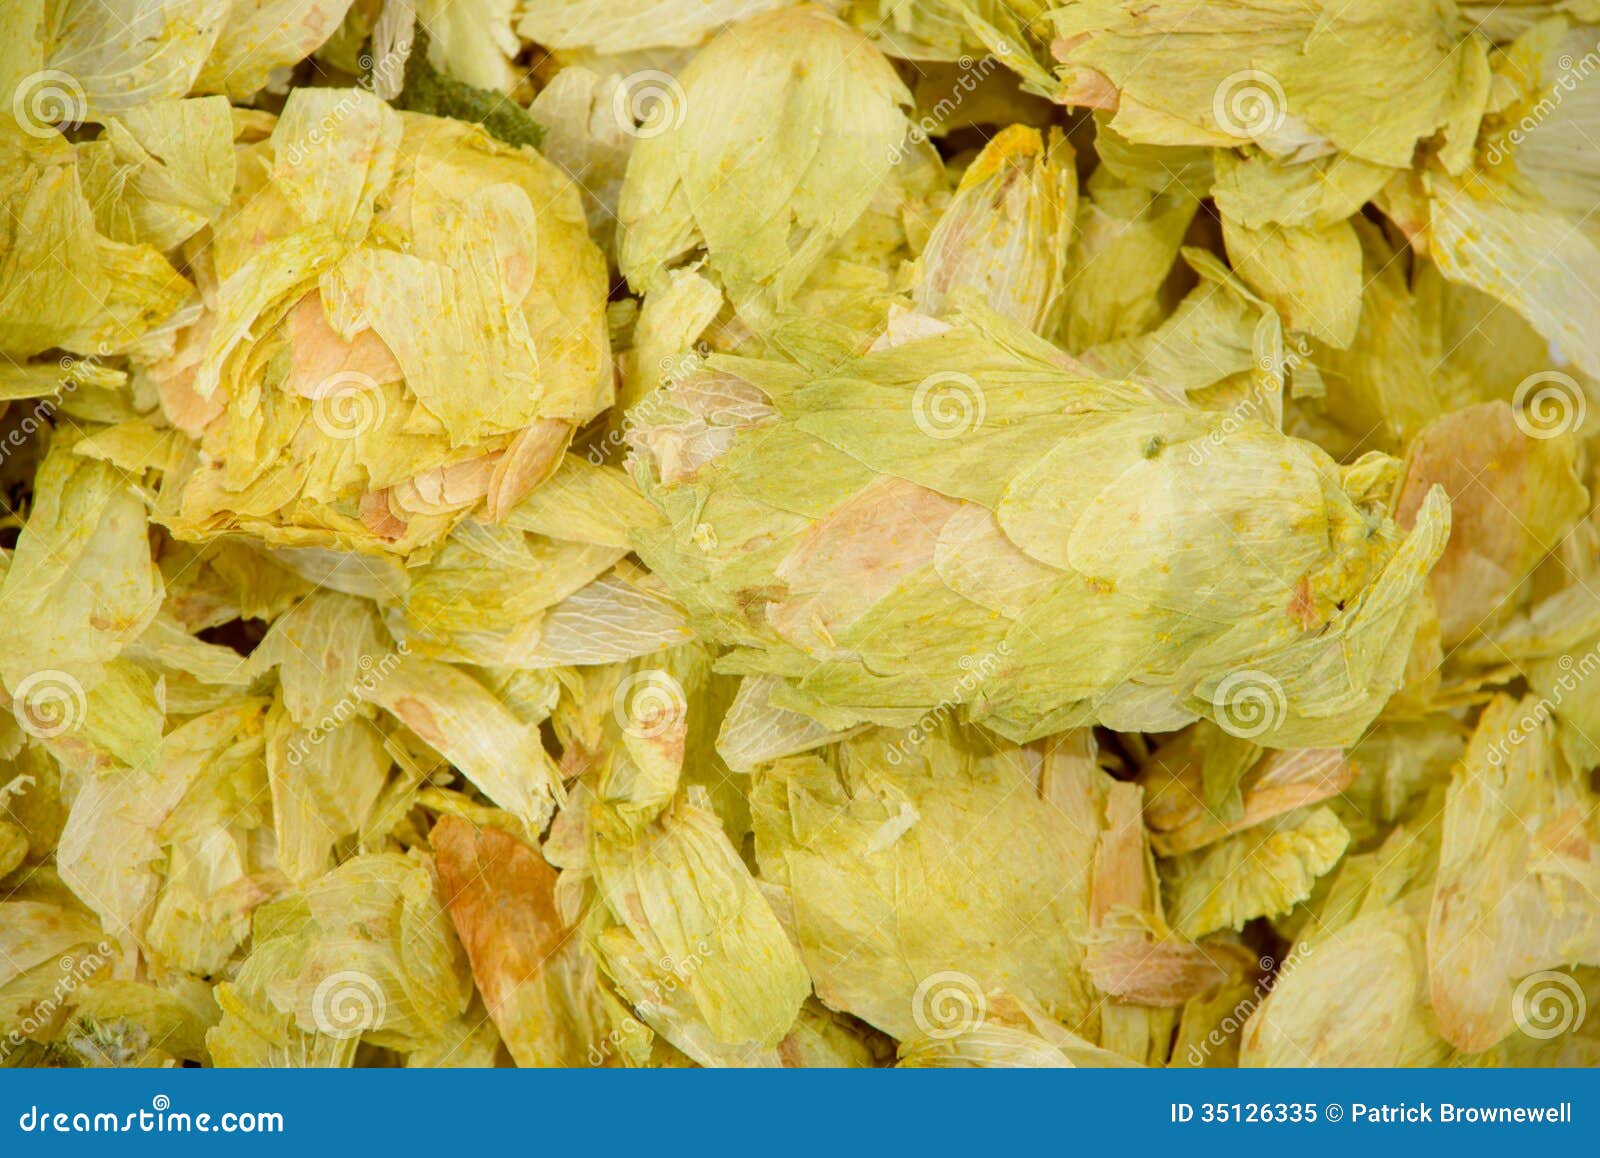 dehydrated hops